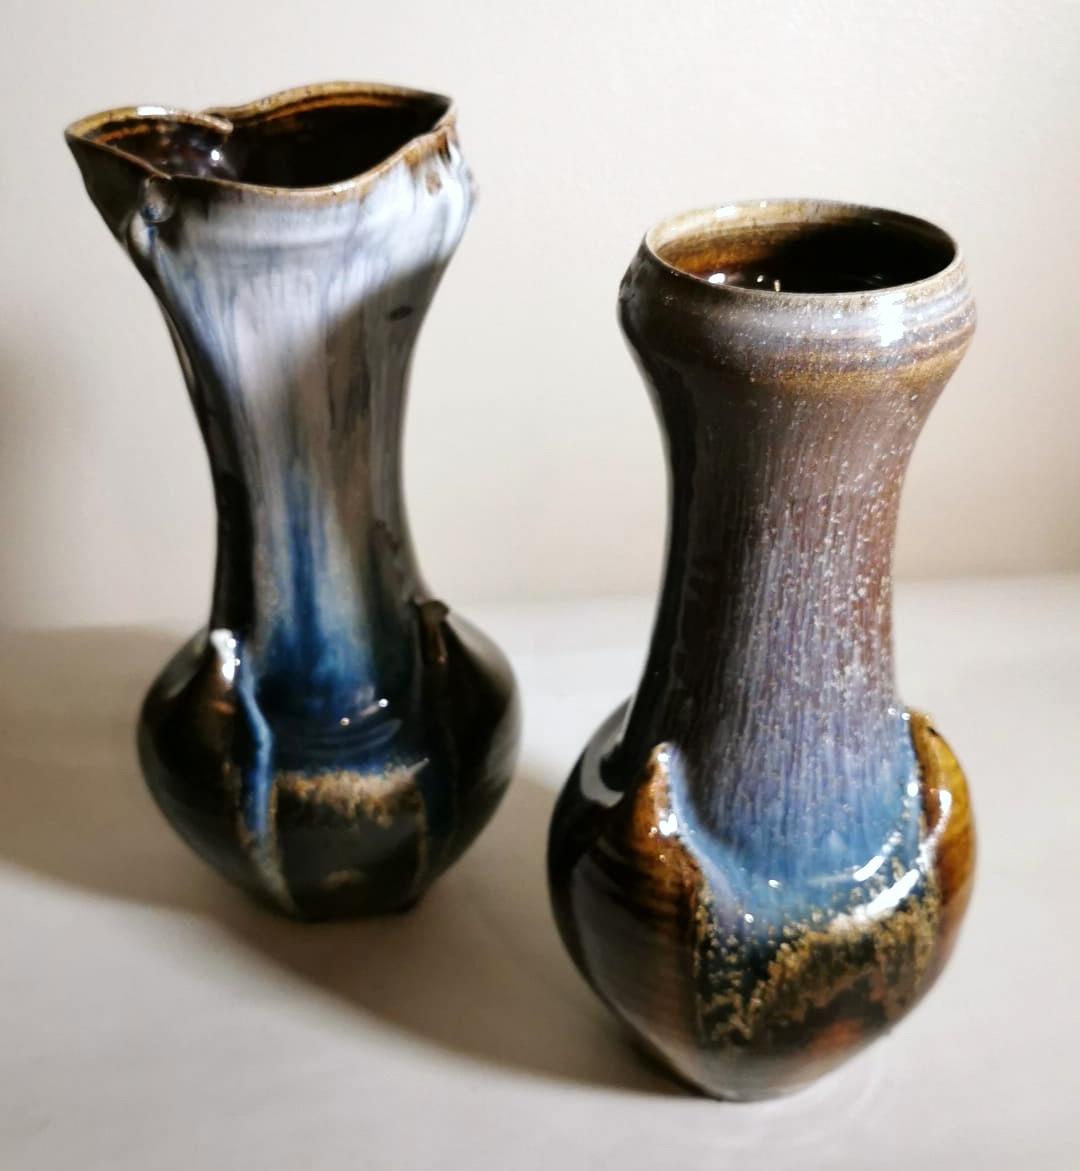 We kindly suggest you read the whole description, because with it we try to give you detailed technical and historical information to guarantee the authenticity of our objects.
Interesting and particular pair of French vases; they were made between